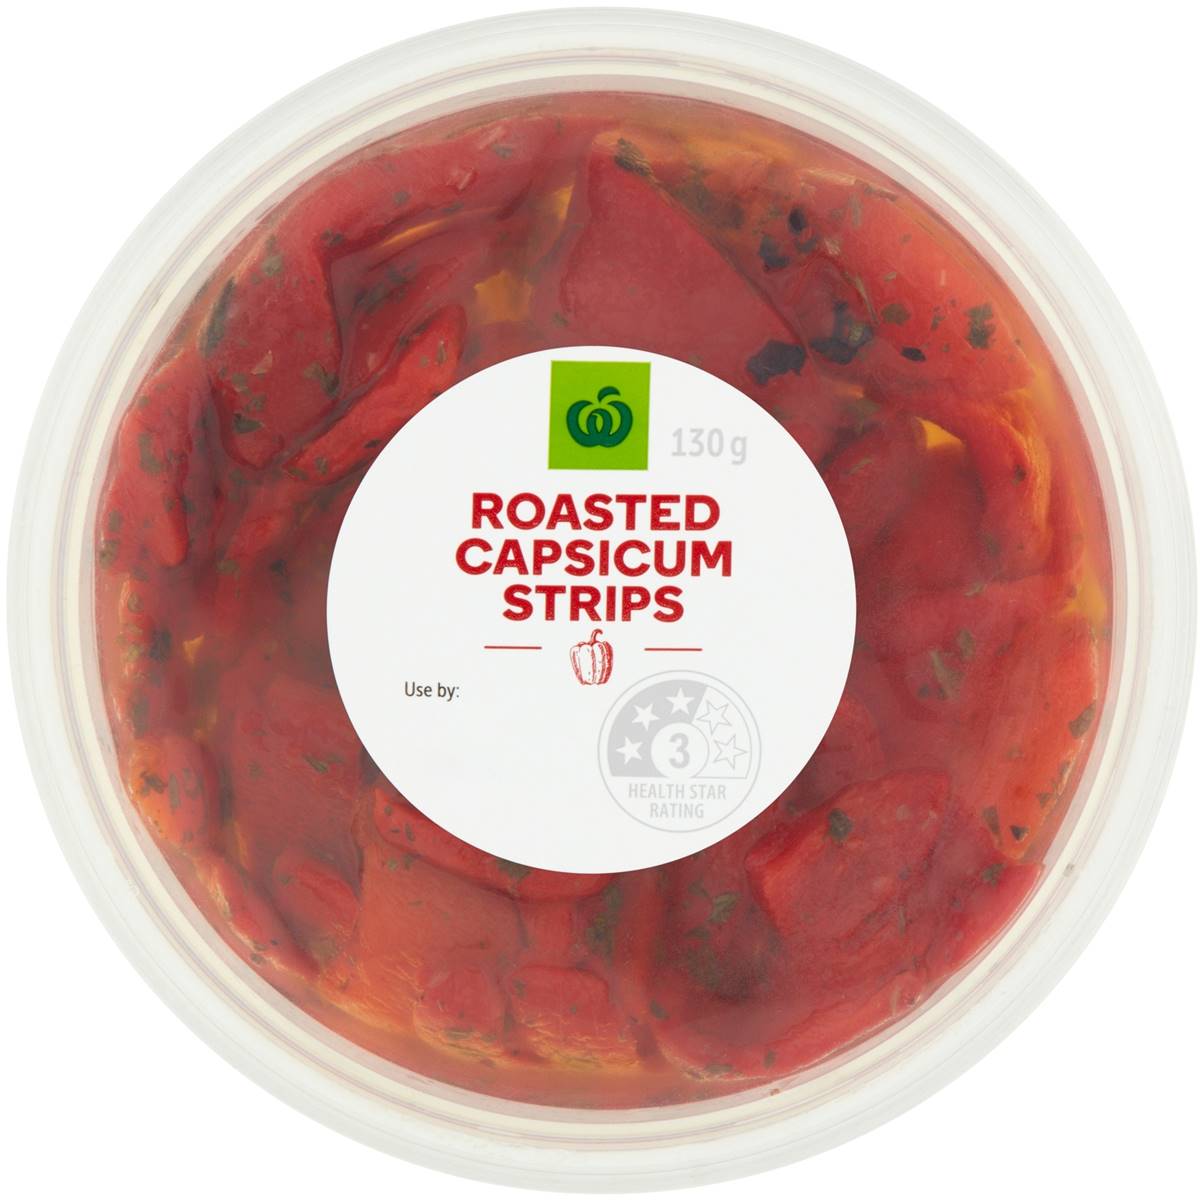 Calories in Woolworths Roasted Capsicum Strips